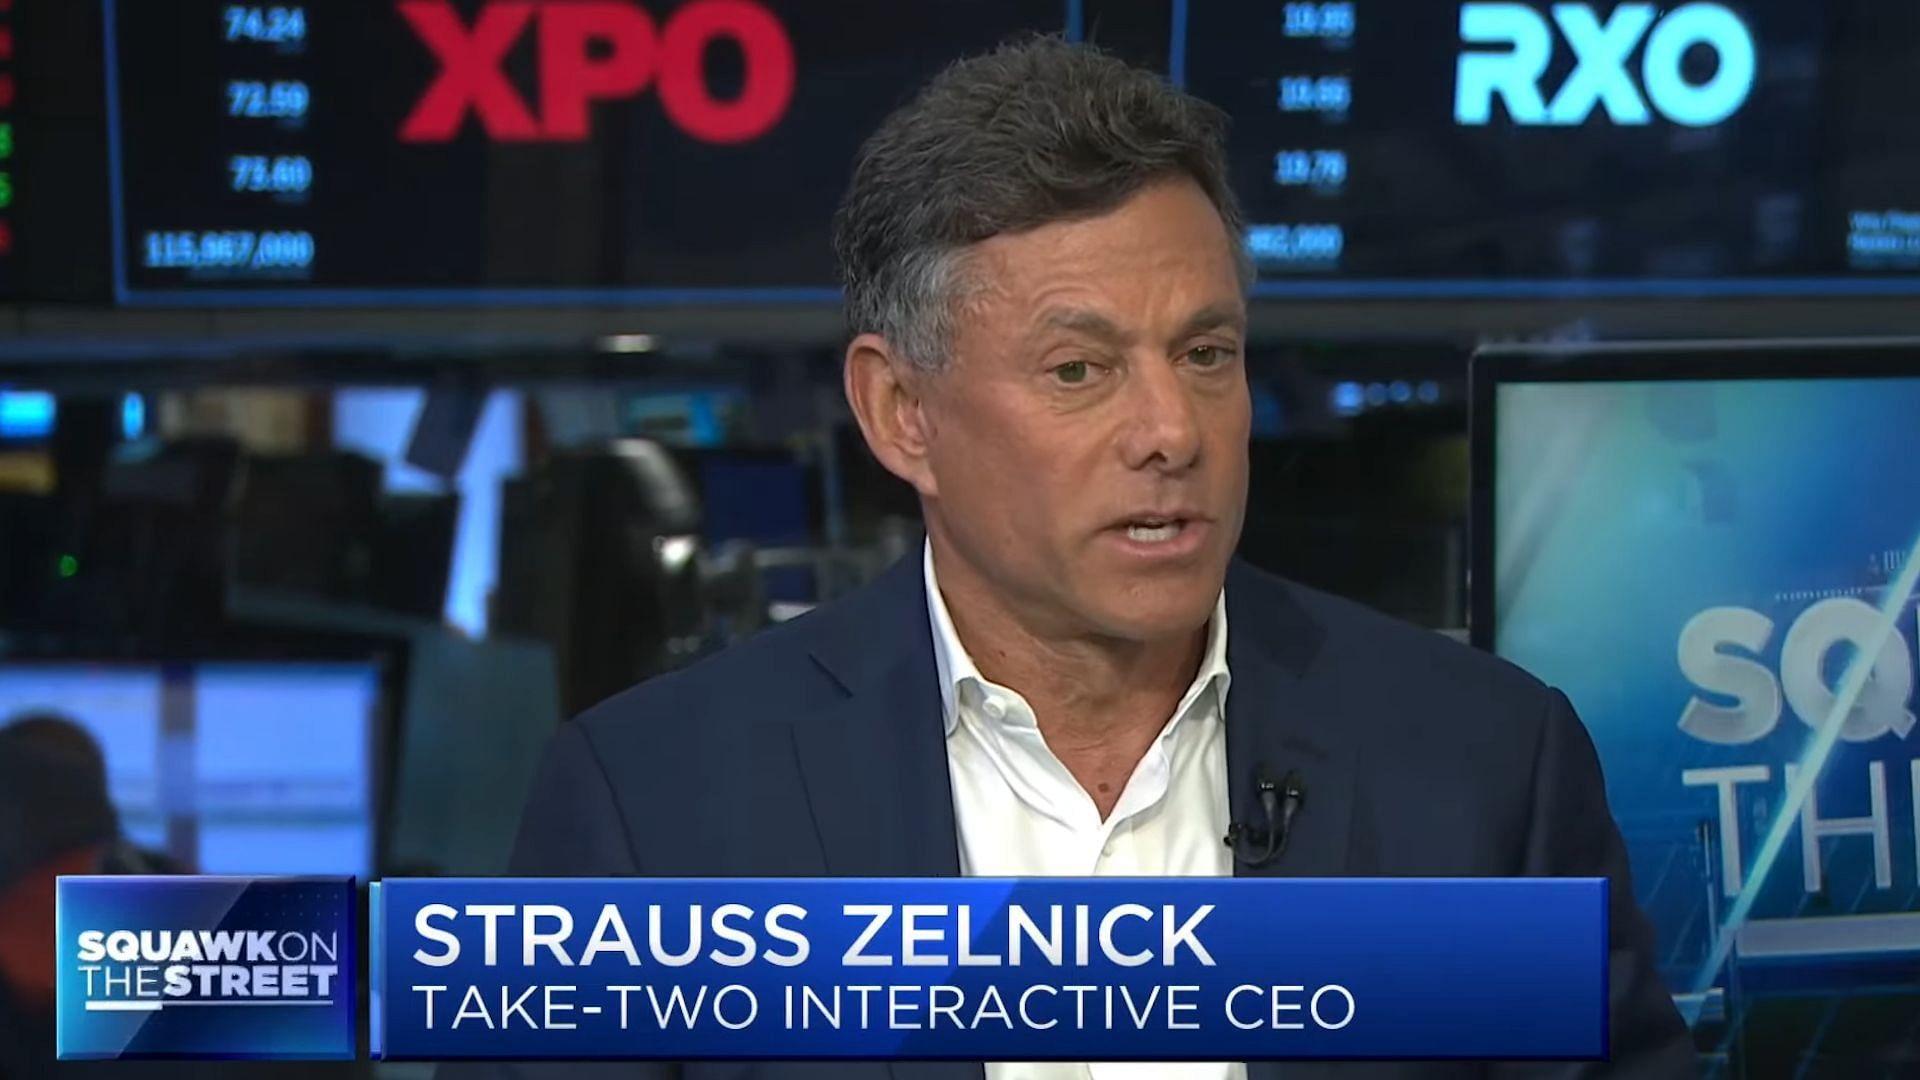 Strauss Zelnick had some interesting words to say in a recent interview